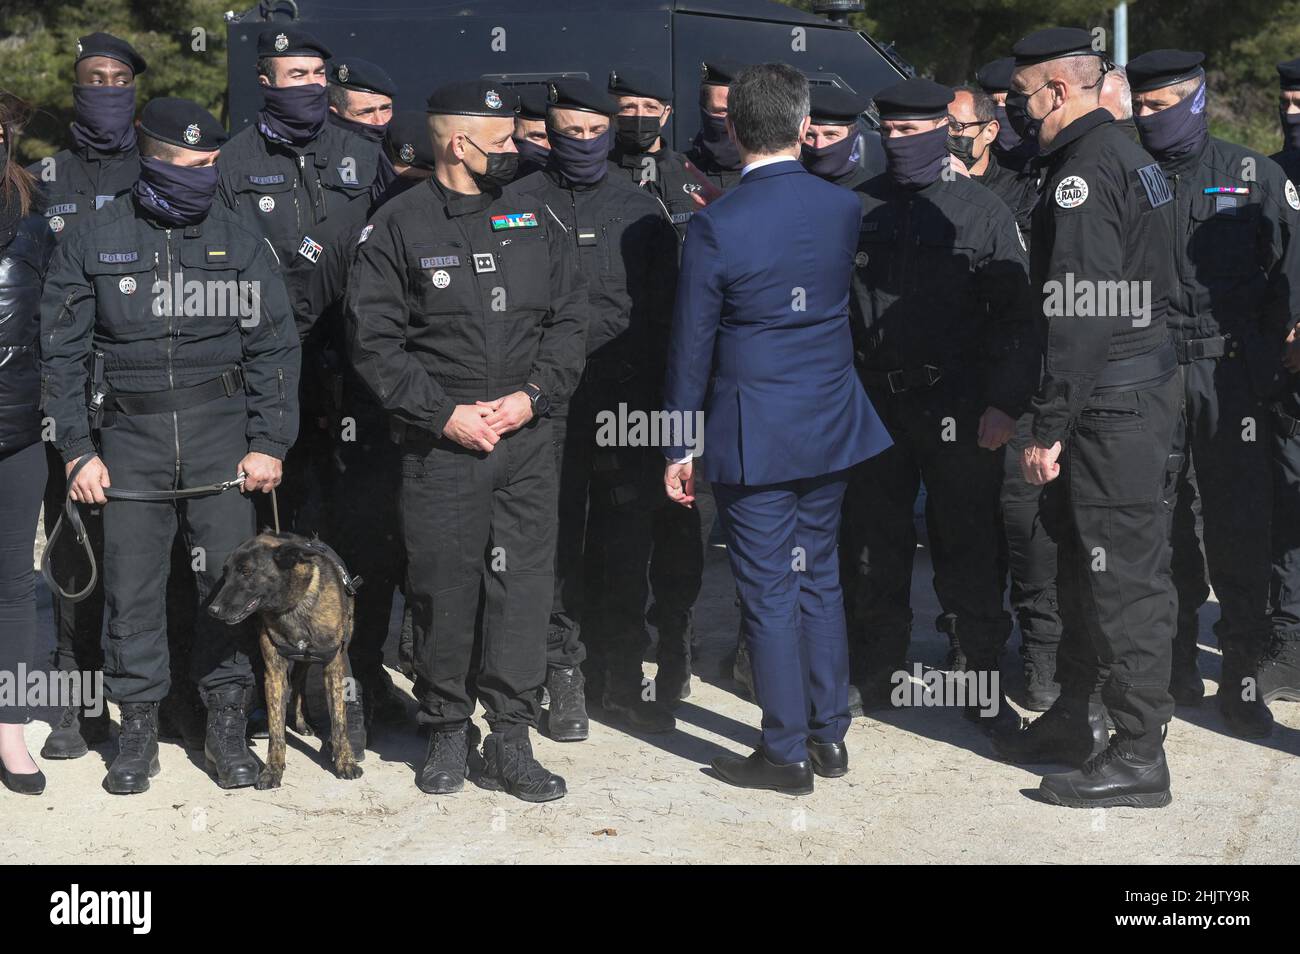 Gerald Darmanin, French Minister of the Interior (Blue suit) is seen with members of the "Research, Assistance, Intervention, Deterrence" Police Unit (RAID) during a visit to the future regional headquarters of the elite RAID in Marseille.The RAID (Research, Assistance, Intervention, Dissuasion) is present in Marseille with a team of about twenty men. Specialists in difficult interventions, the Raid police officers are the elite of the police in France. In 2023 new more spacious and adapted premises will be built in the port of Marseille. Stock Photo